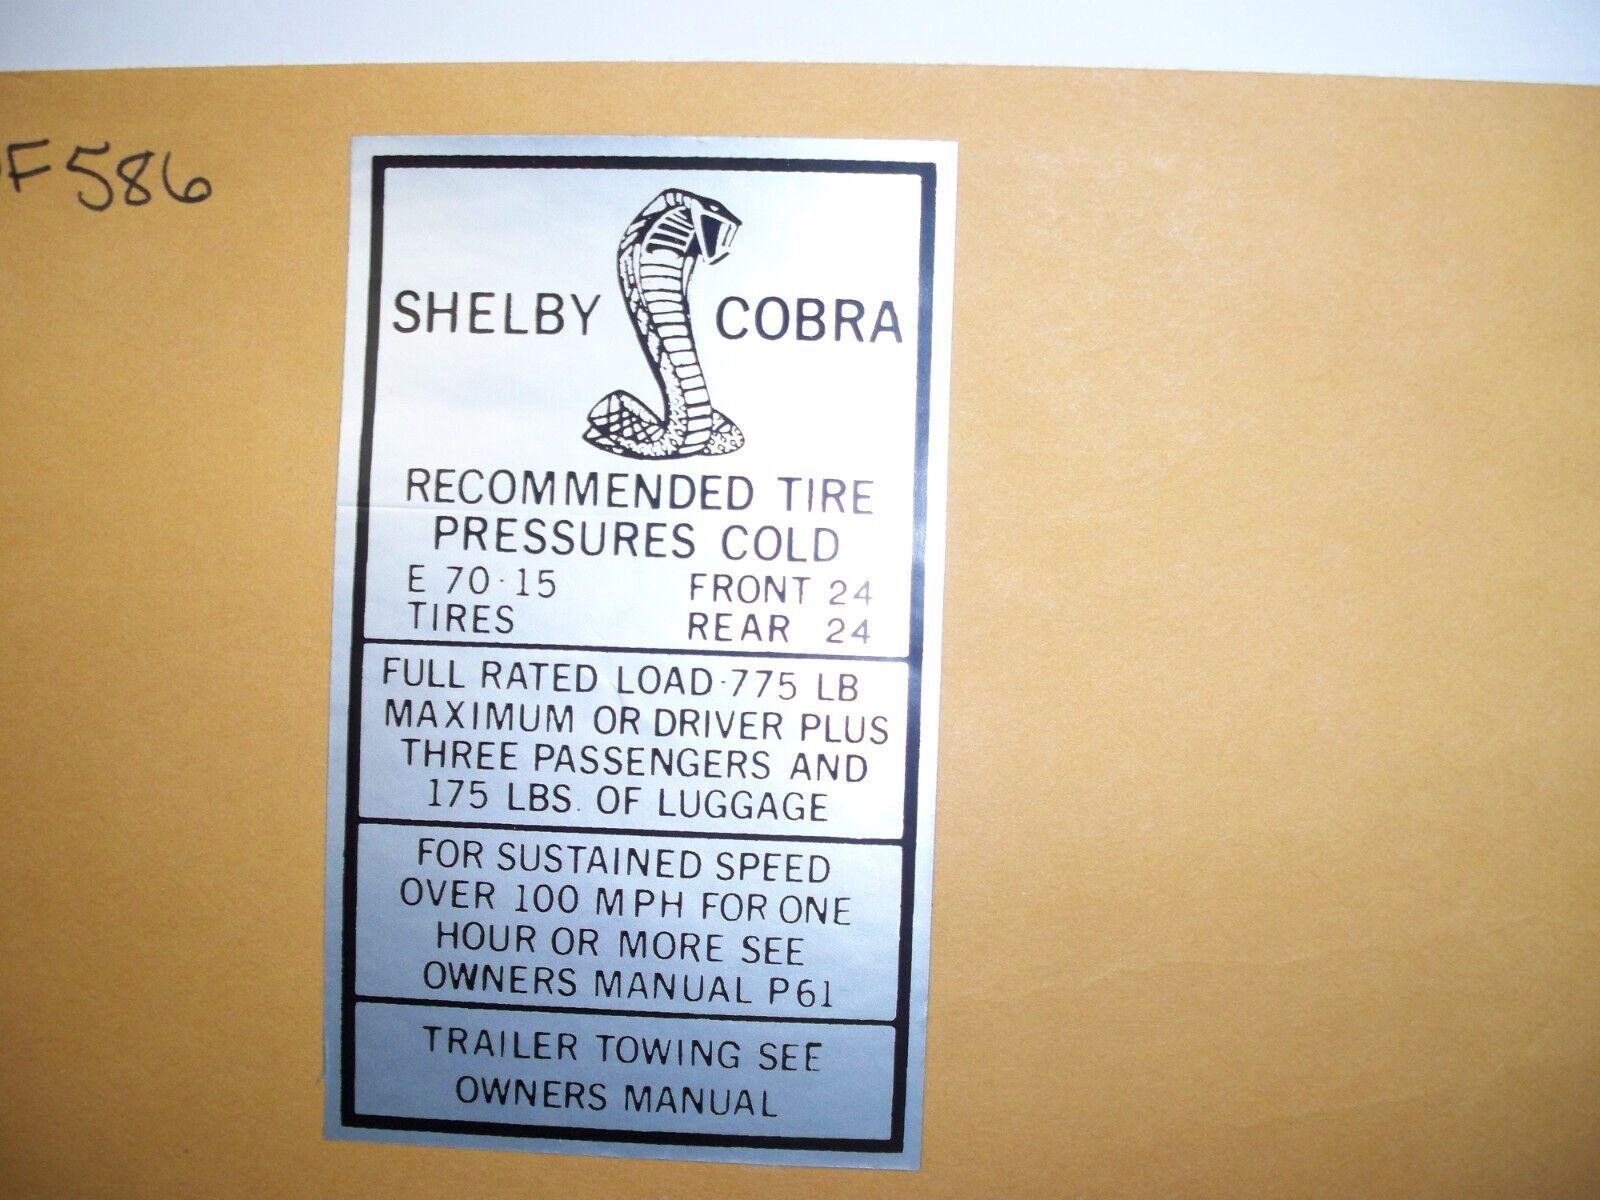 Shelby Cobra Tire Pressure Decal d586 $9.95